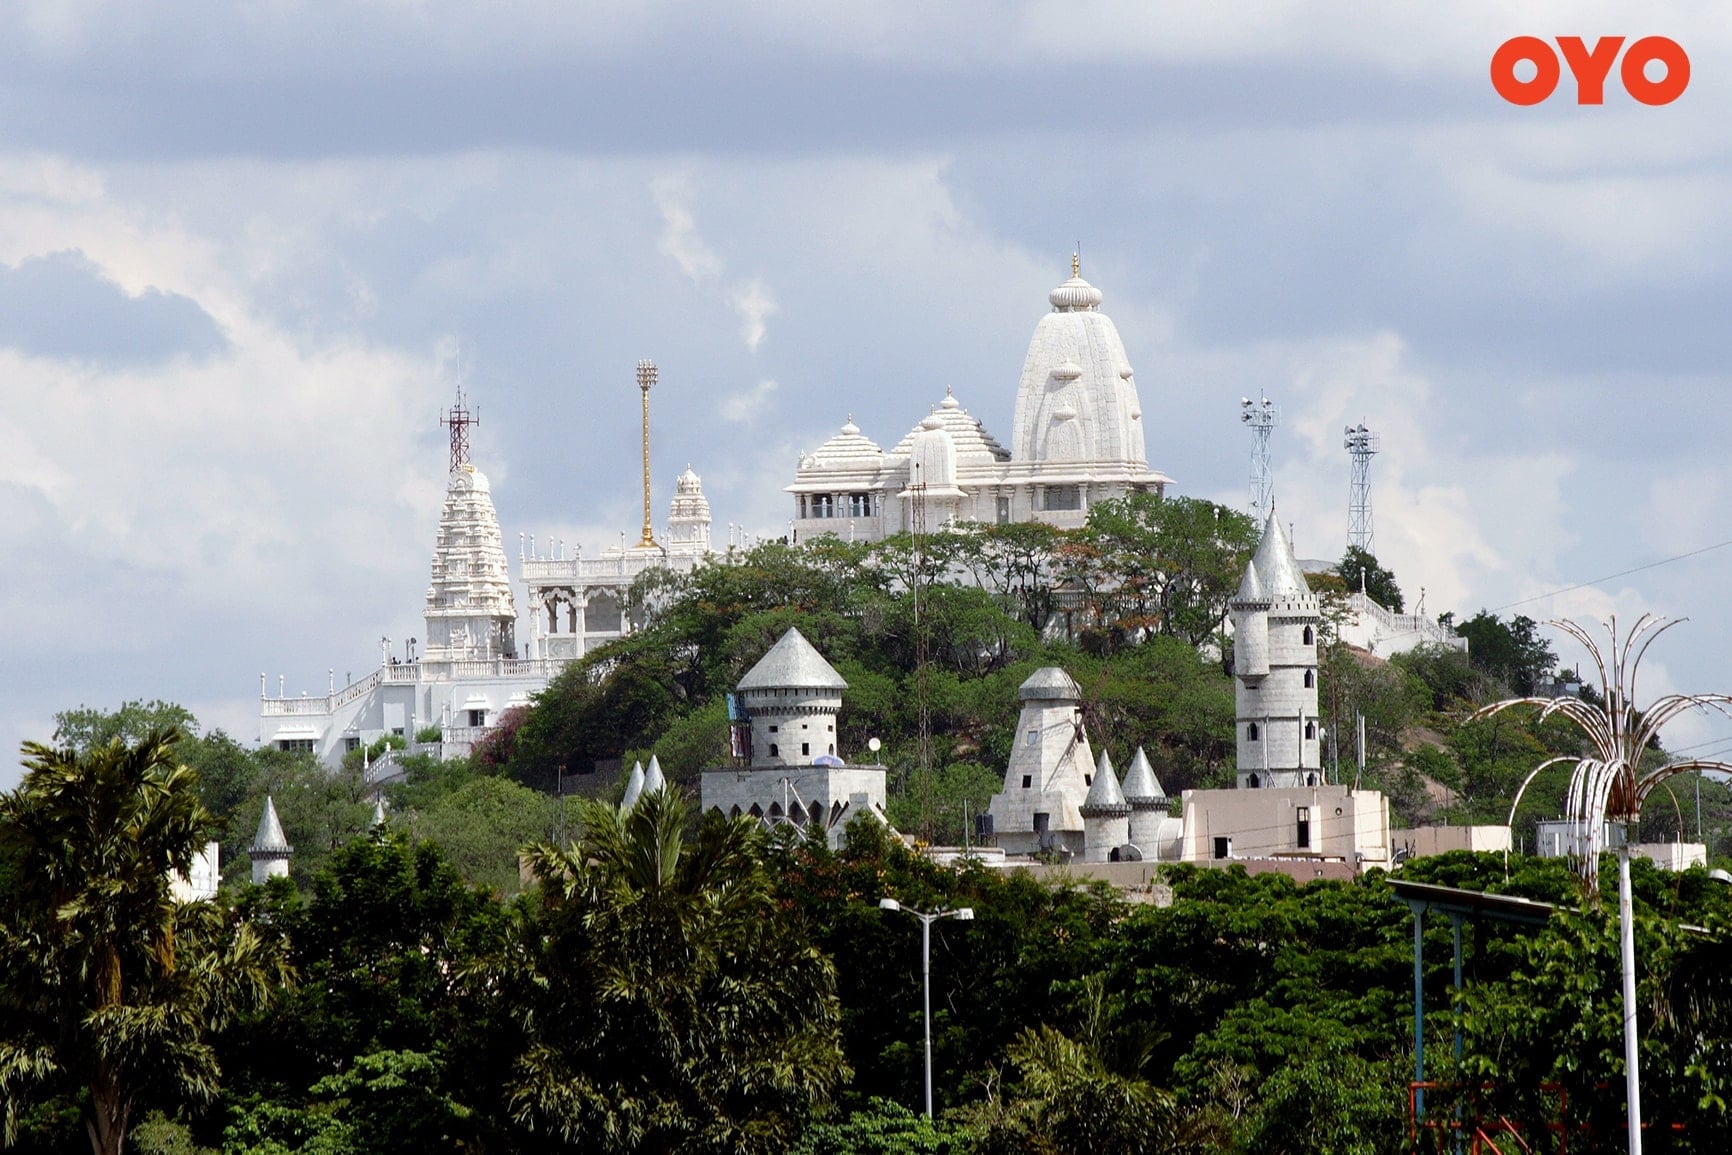 Famous Attractions in Hyderabad - OYO Hotels: Travel Blog